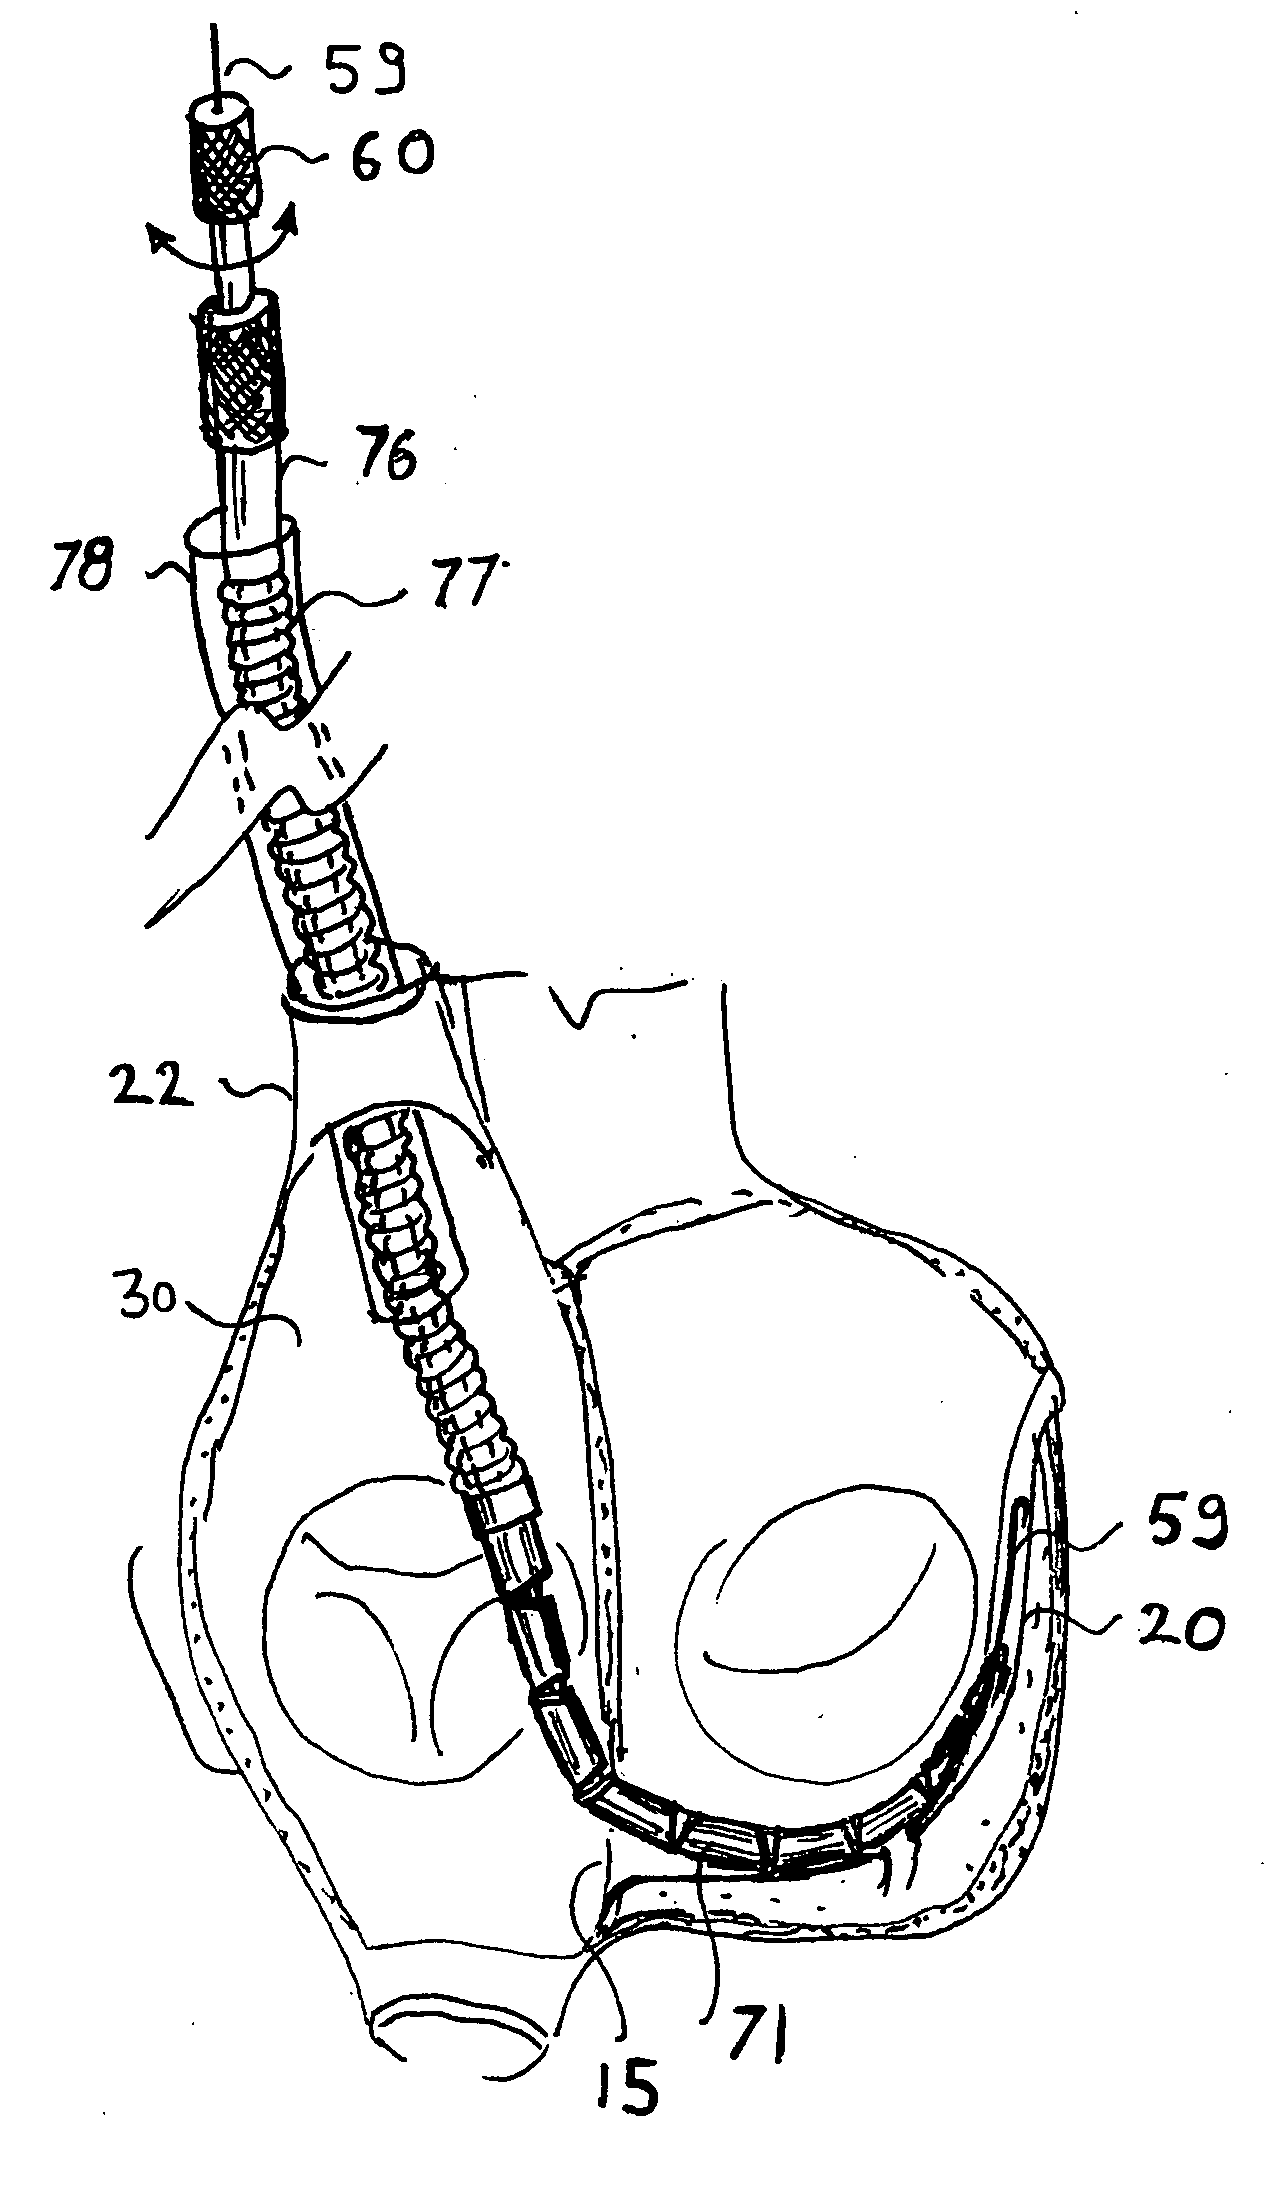 Method and apparatus for percutaneous reduction of anterior-posterior diameter of mitral valve